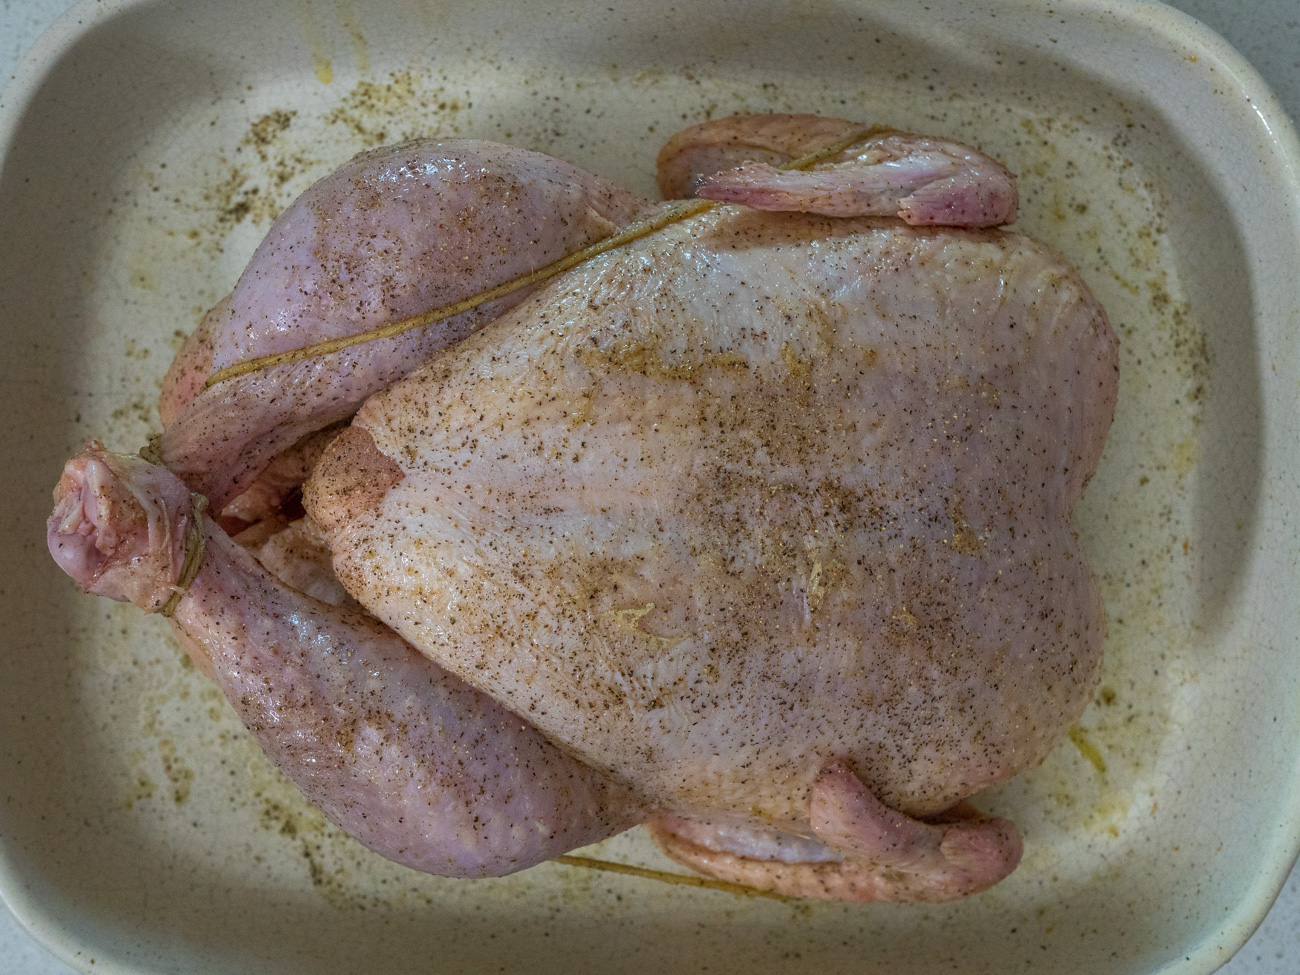 Brush chicken with 3 tablespoons of olive oil and rub in salt and pepper.